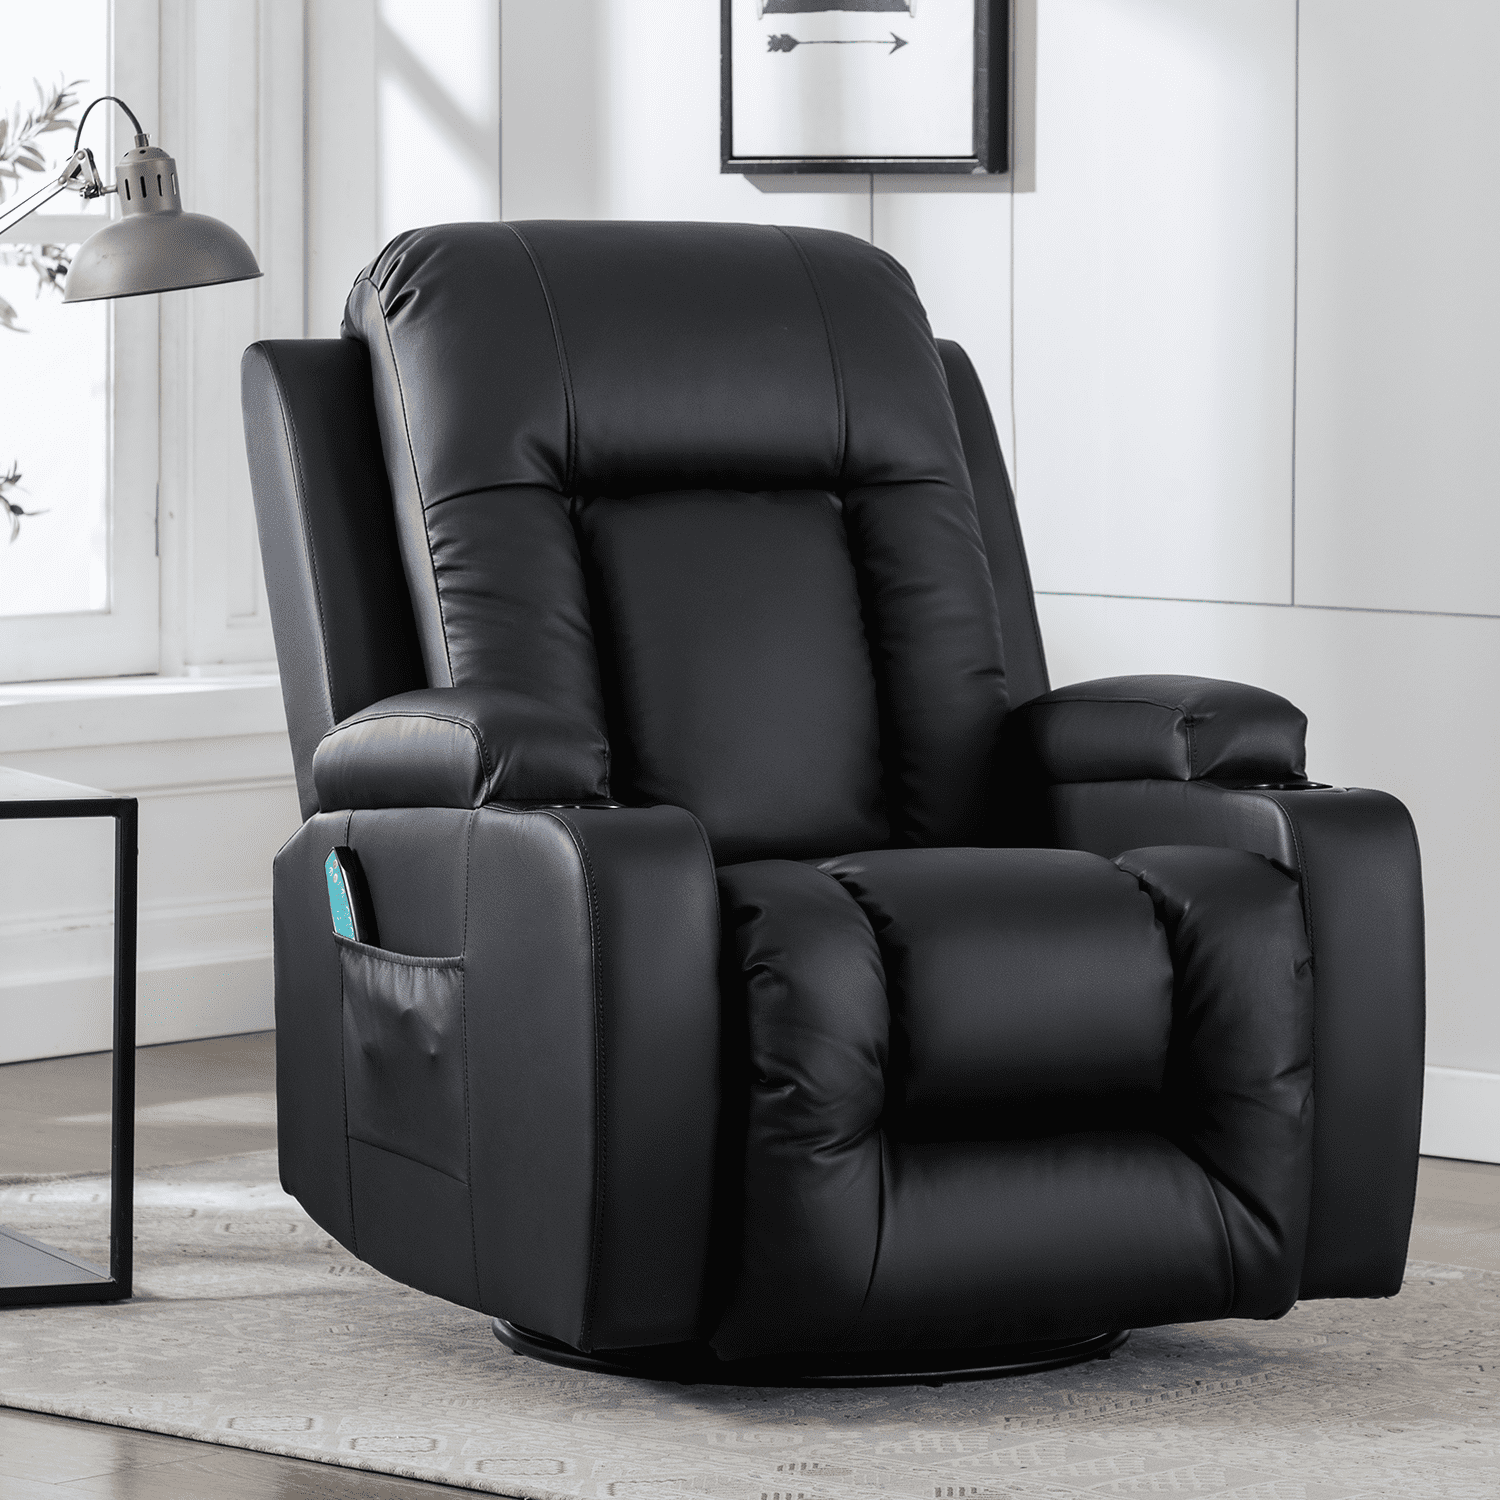 Erommy Large Recliner Chair Heat And, Rocking Leather Recliners